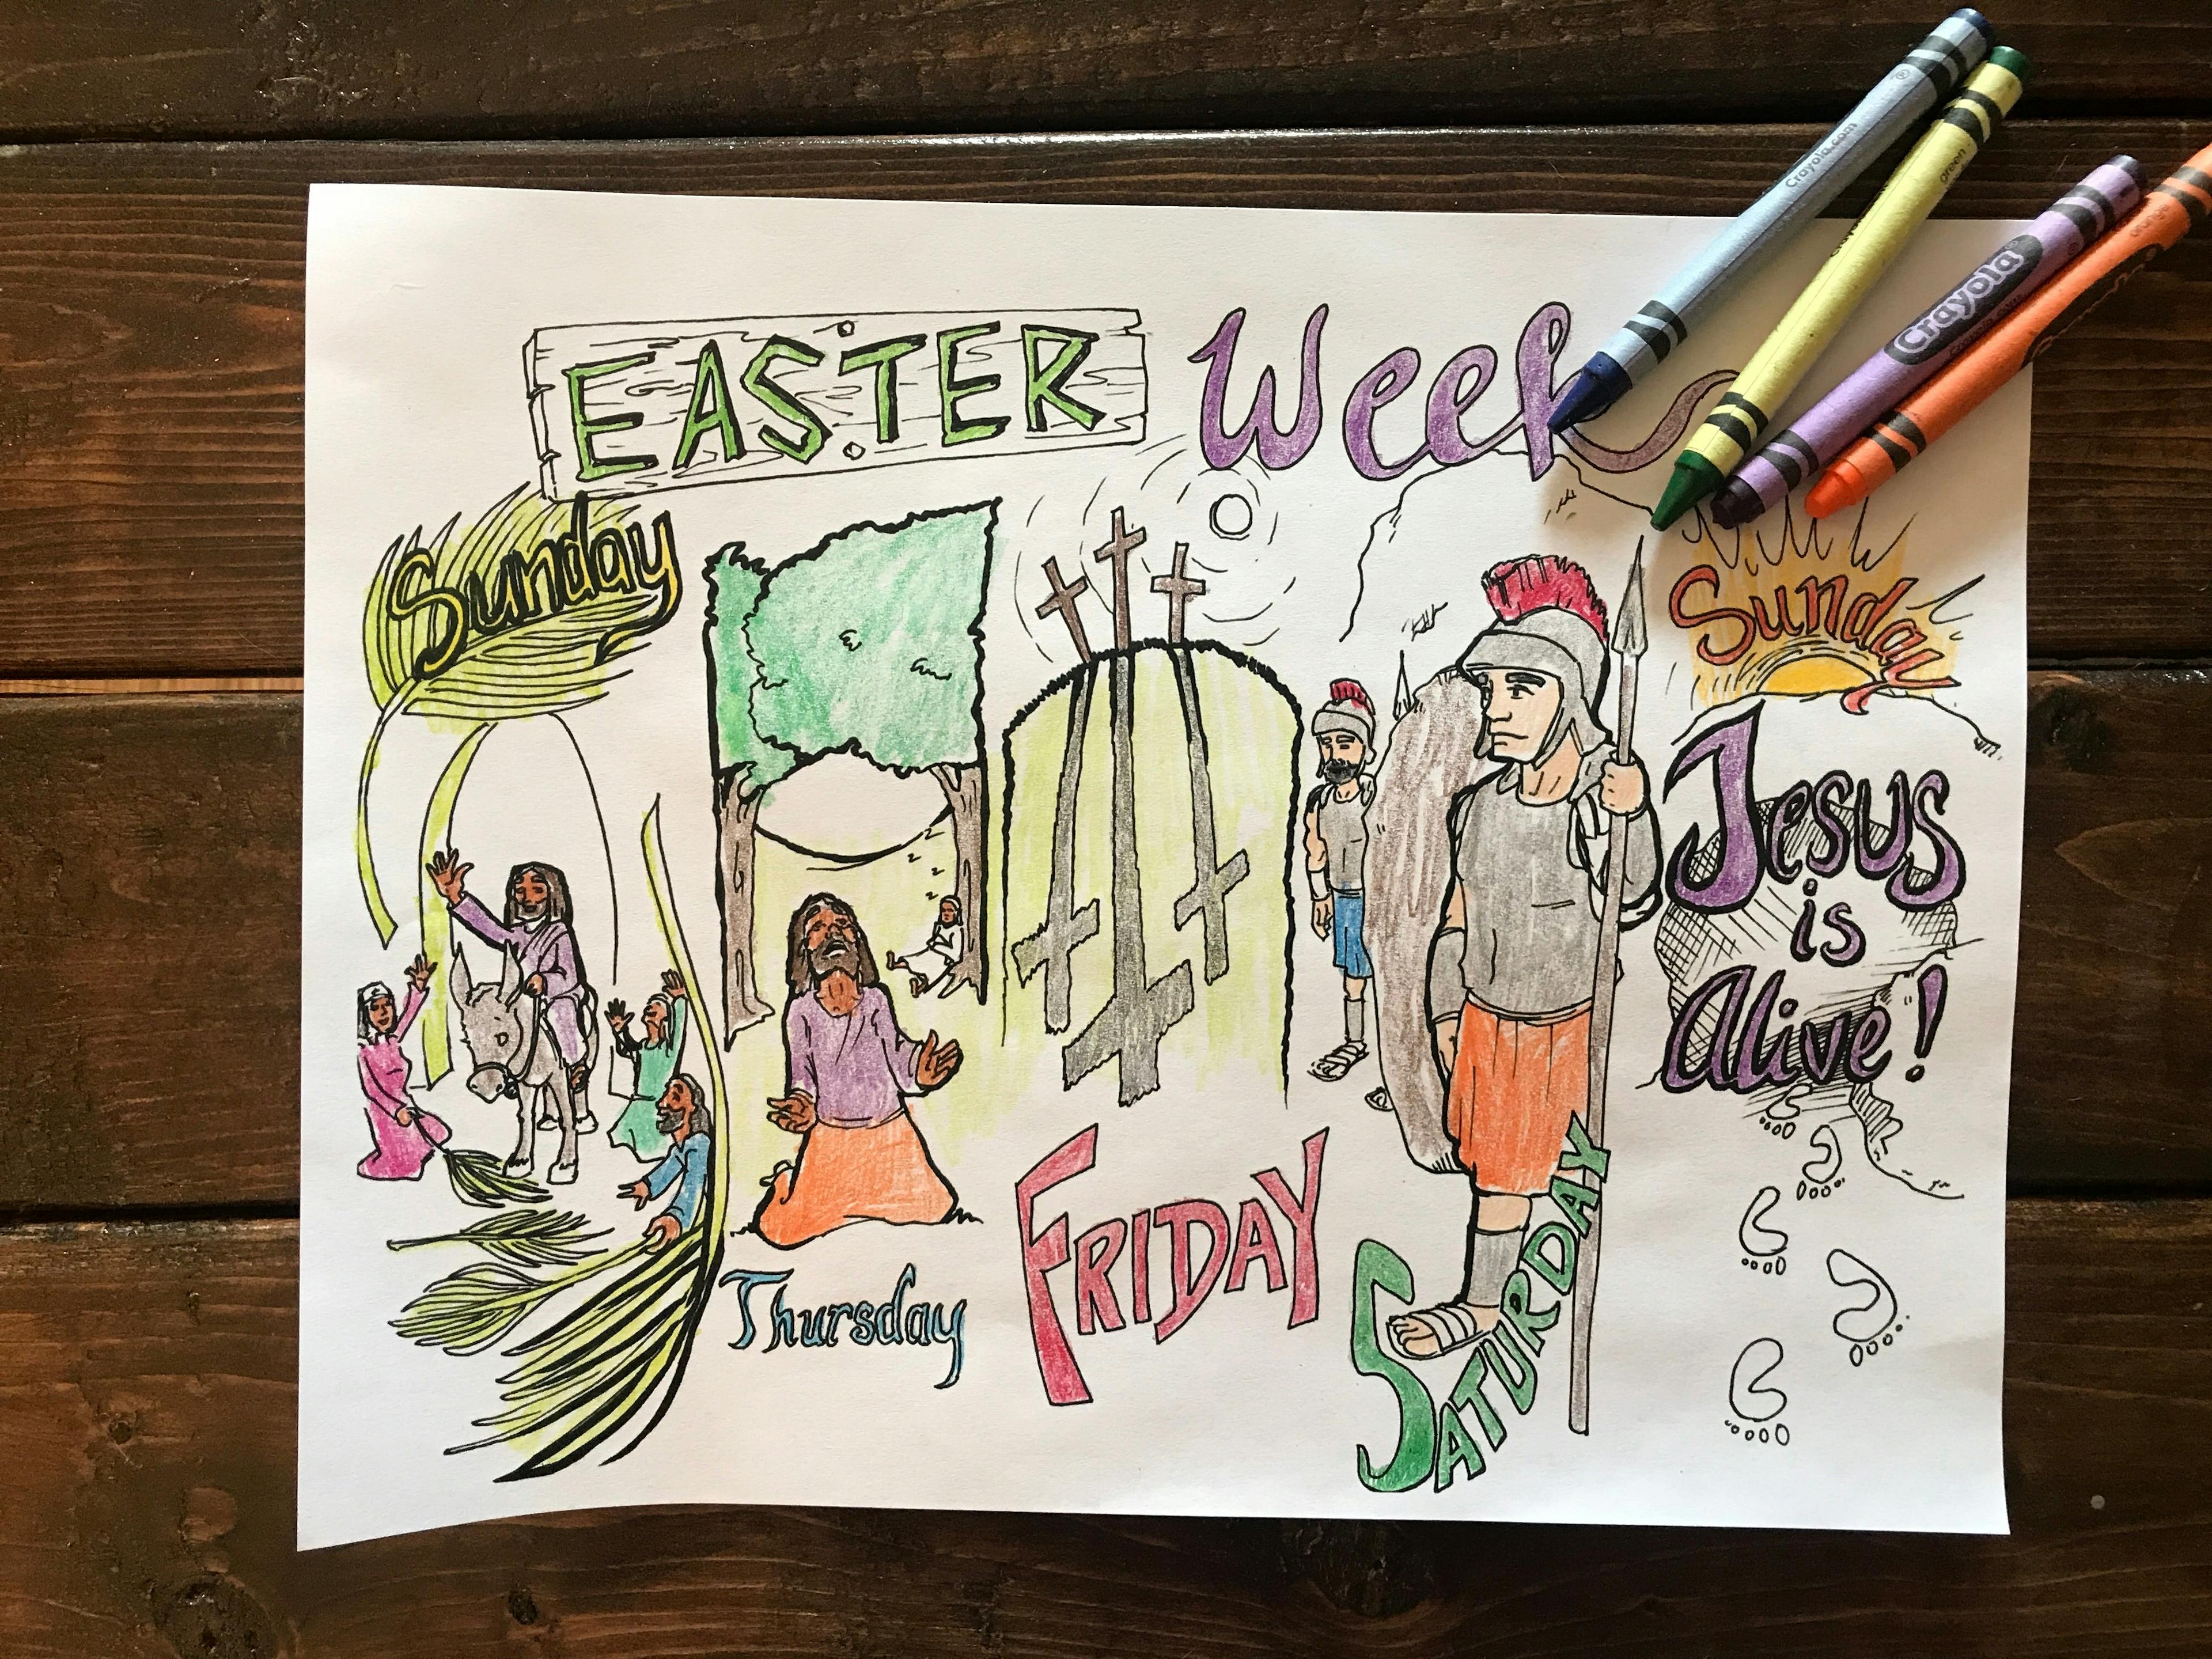 Easter Week Bible Coloring Page